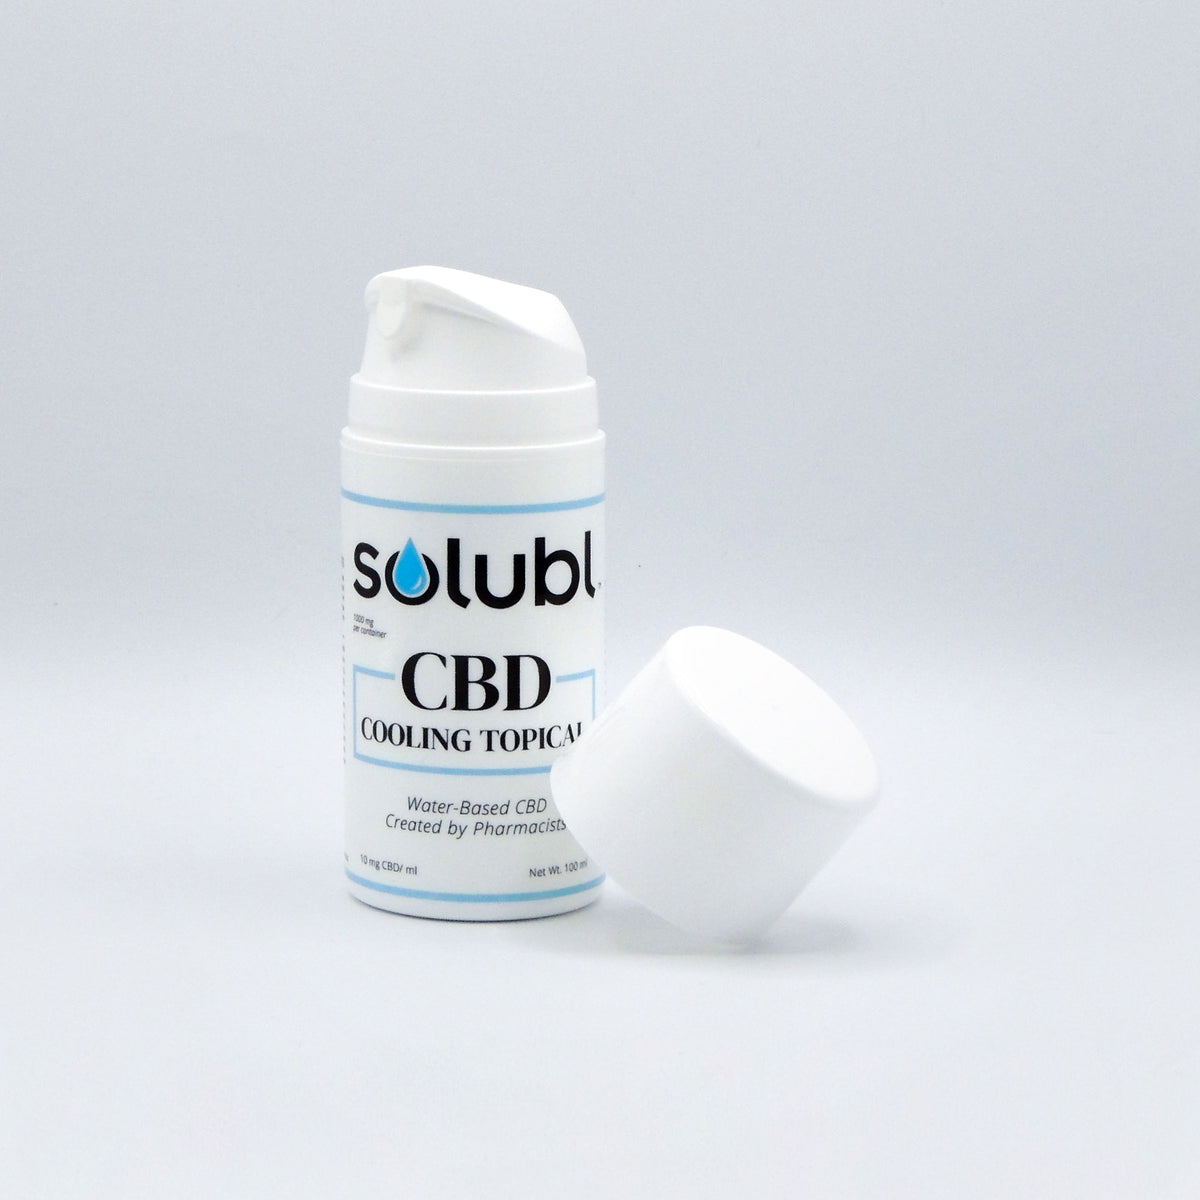 Water-based CBD Cooling Topical 100ml with cap off